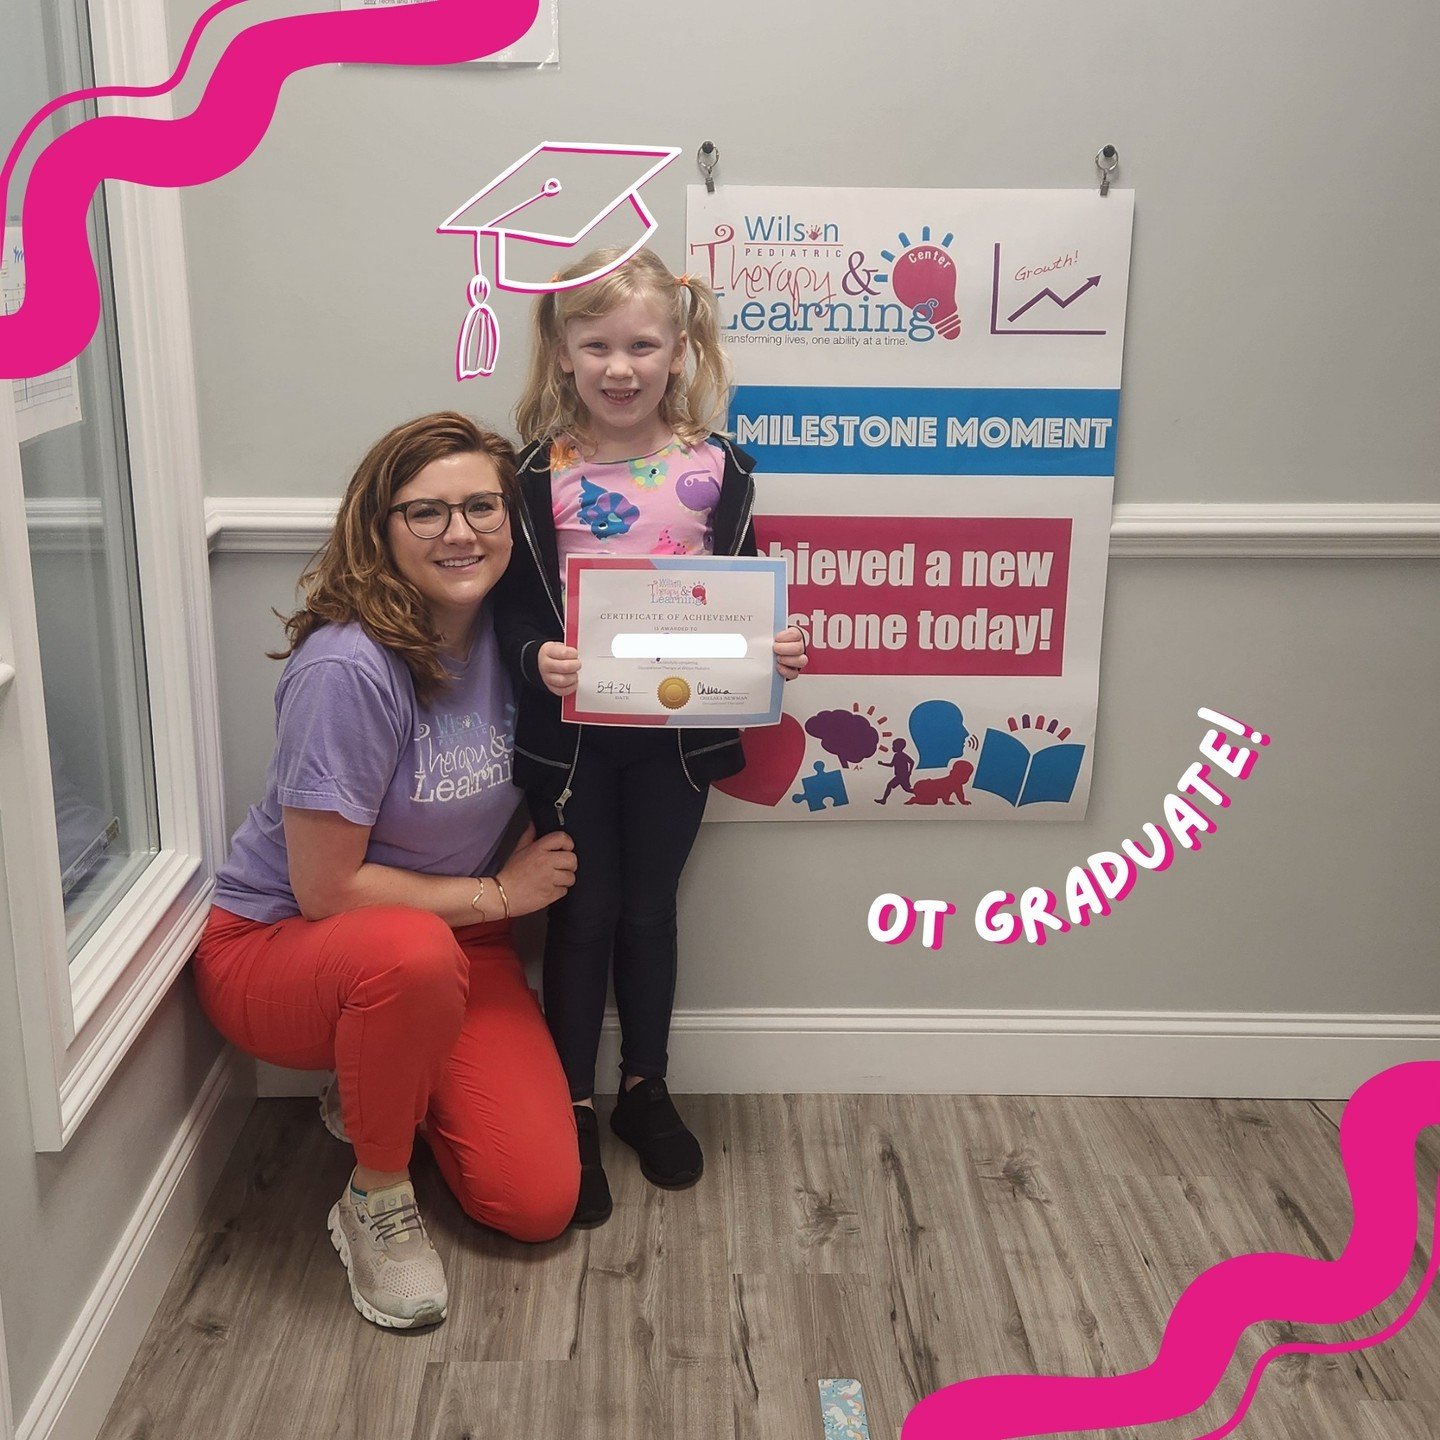 We've got an OT graduate among us!! Way to go, kiddo!  We are so proud of all you've accomplished at your time here at WPT!💞

#WilsonPediatricTherapy #WPT #OTGraduate #PediatricOT #PediatricOccupationalTherapy #OccupationalTherapy #OT #WayToGo #Mile